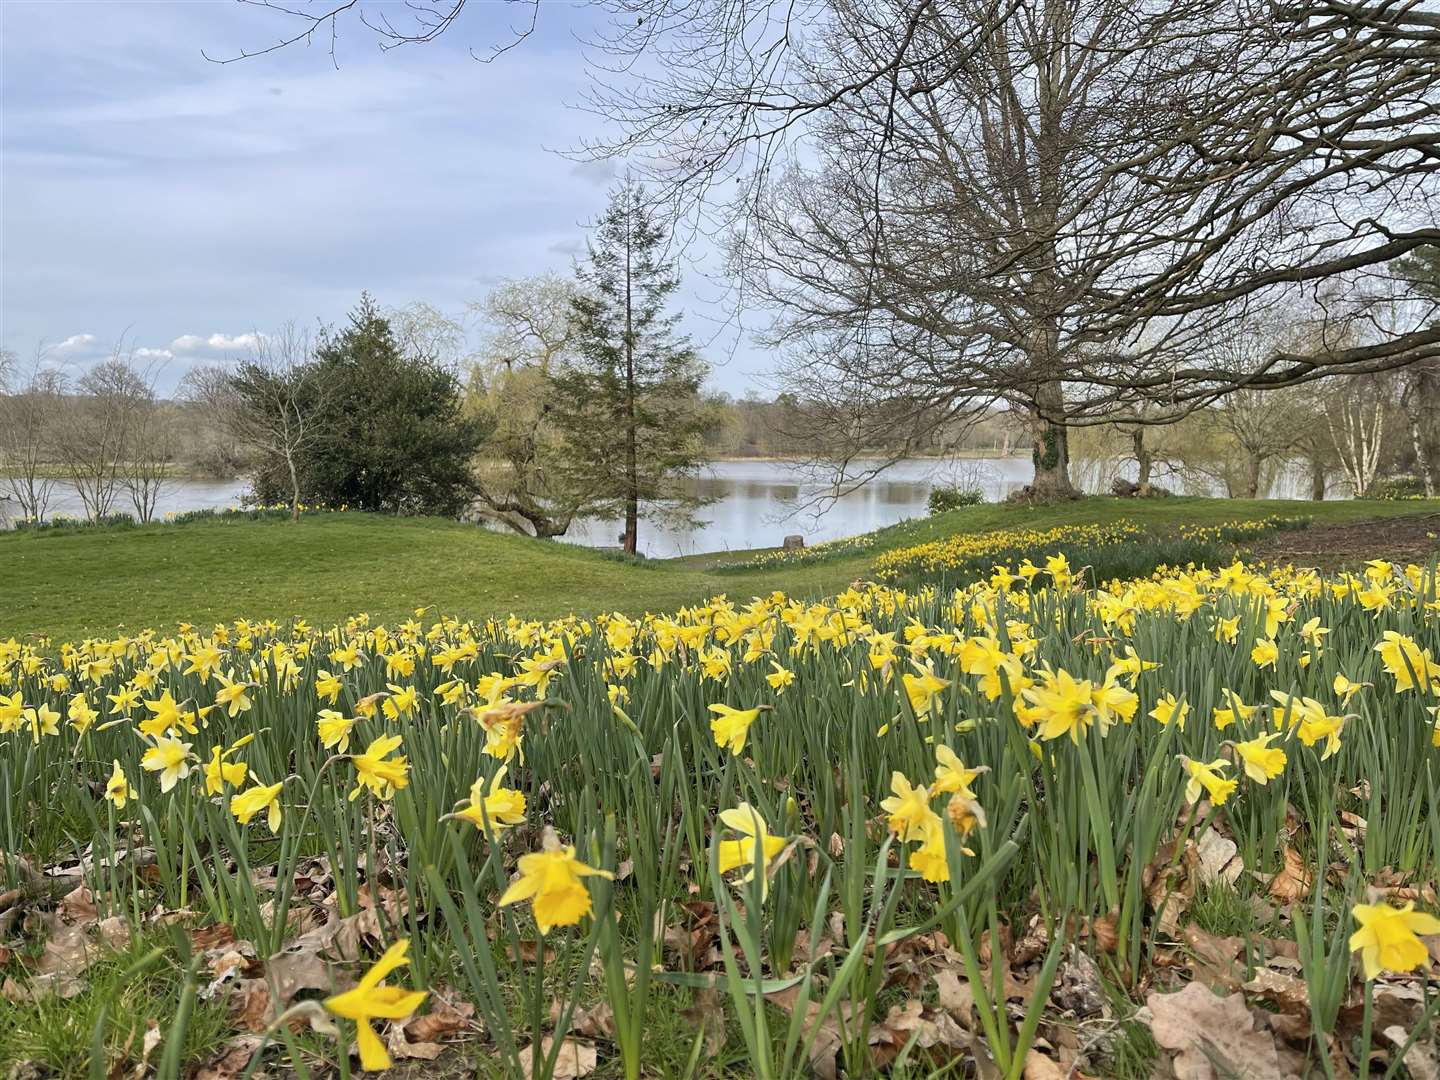 60,000 daffodils in bloom across the Estate in March and early April. Picture: Vikki Rimmer